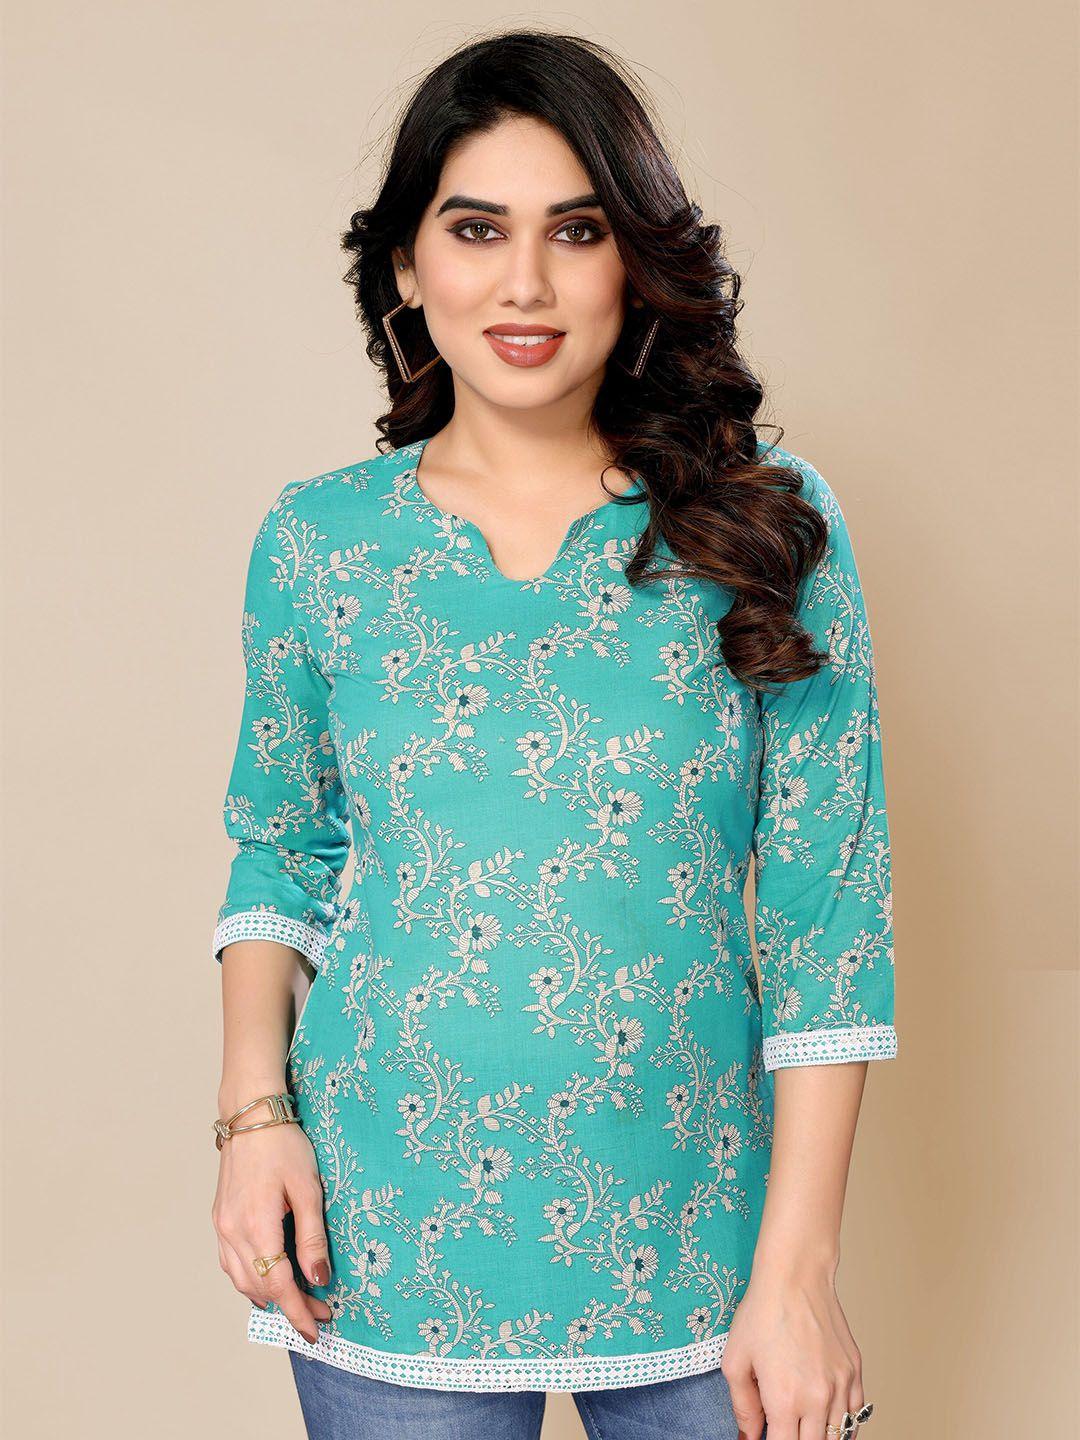 pyari - a style for every story floral printed cotton top